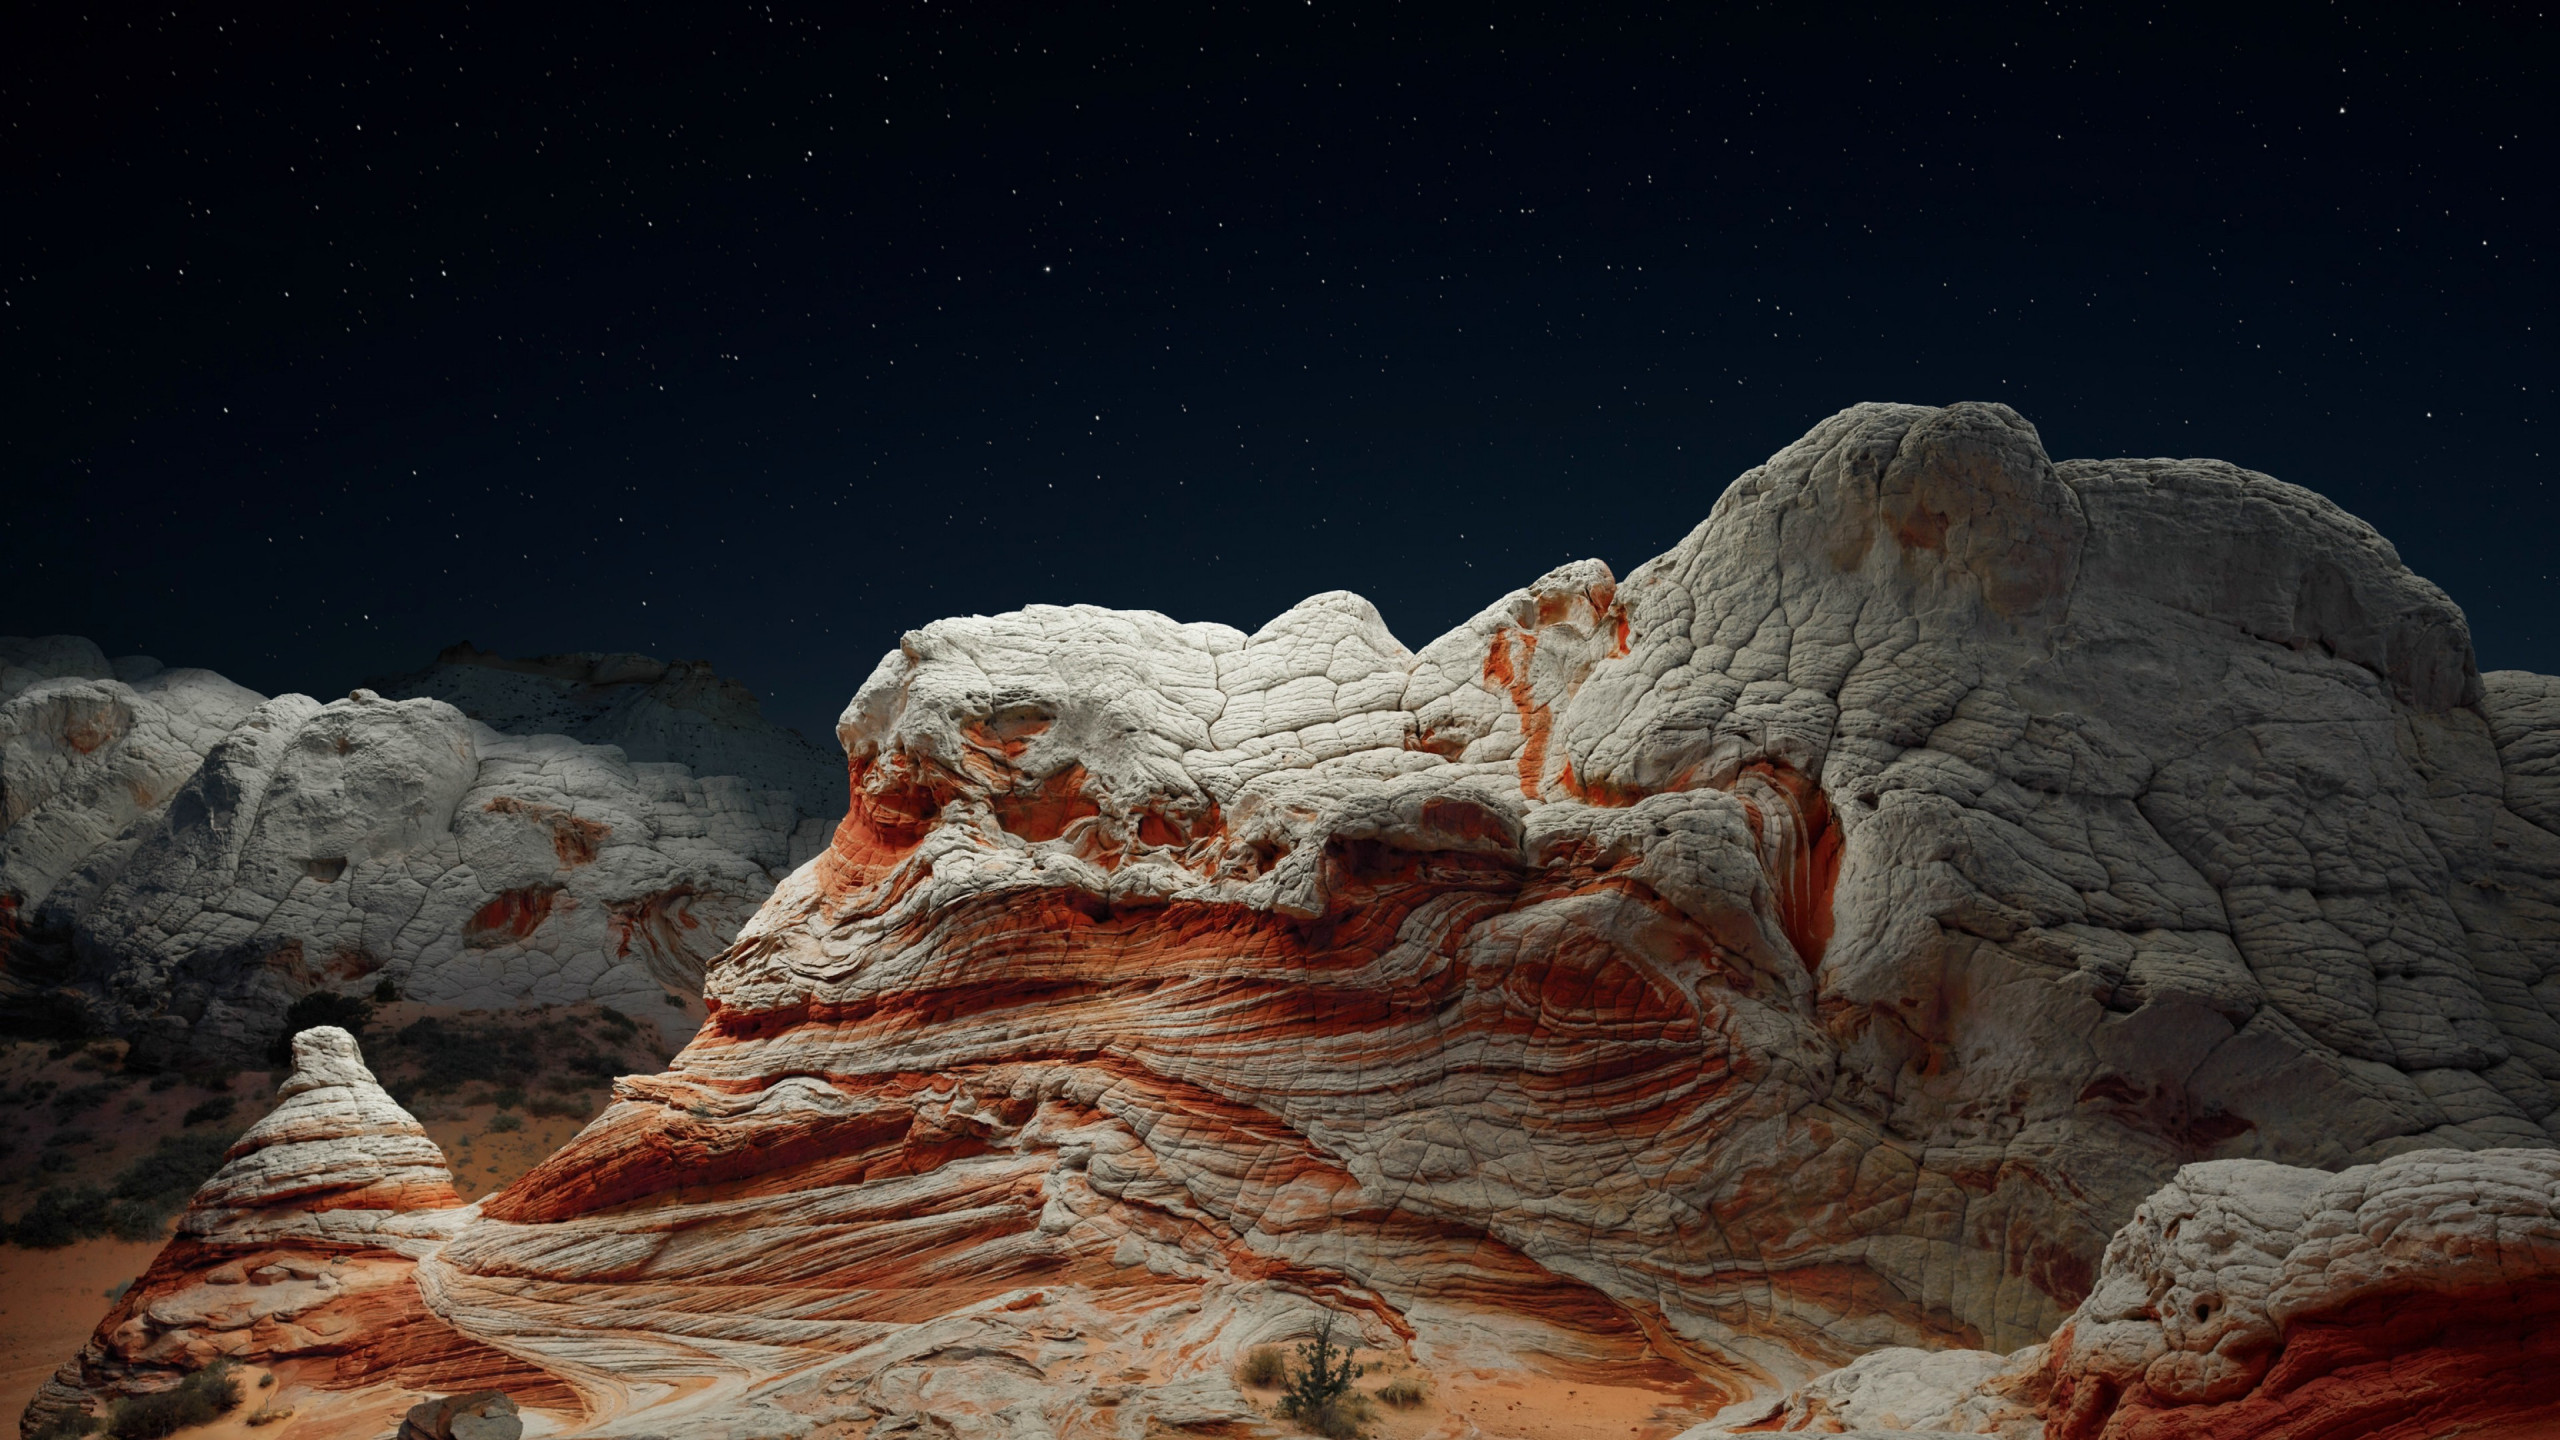 The night sky and desert valley wallpaper 2560x1440